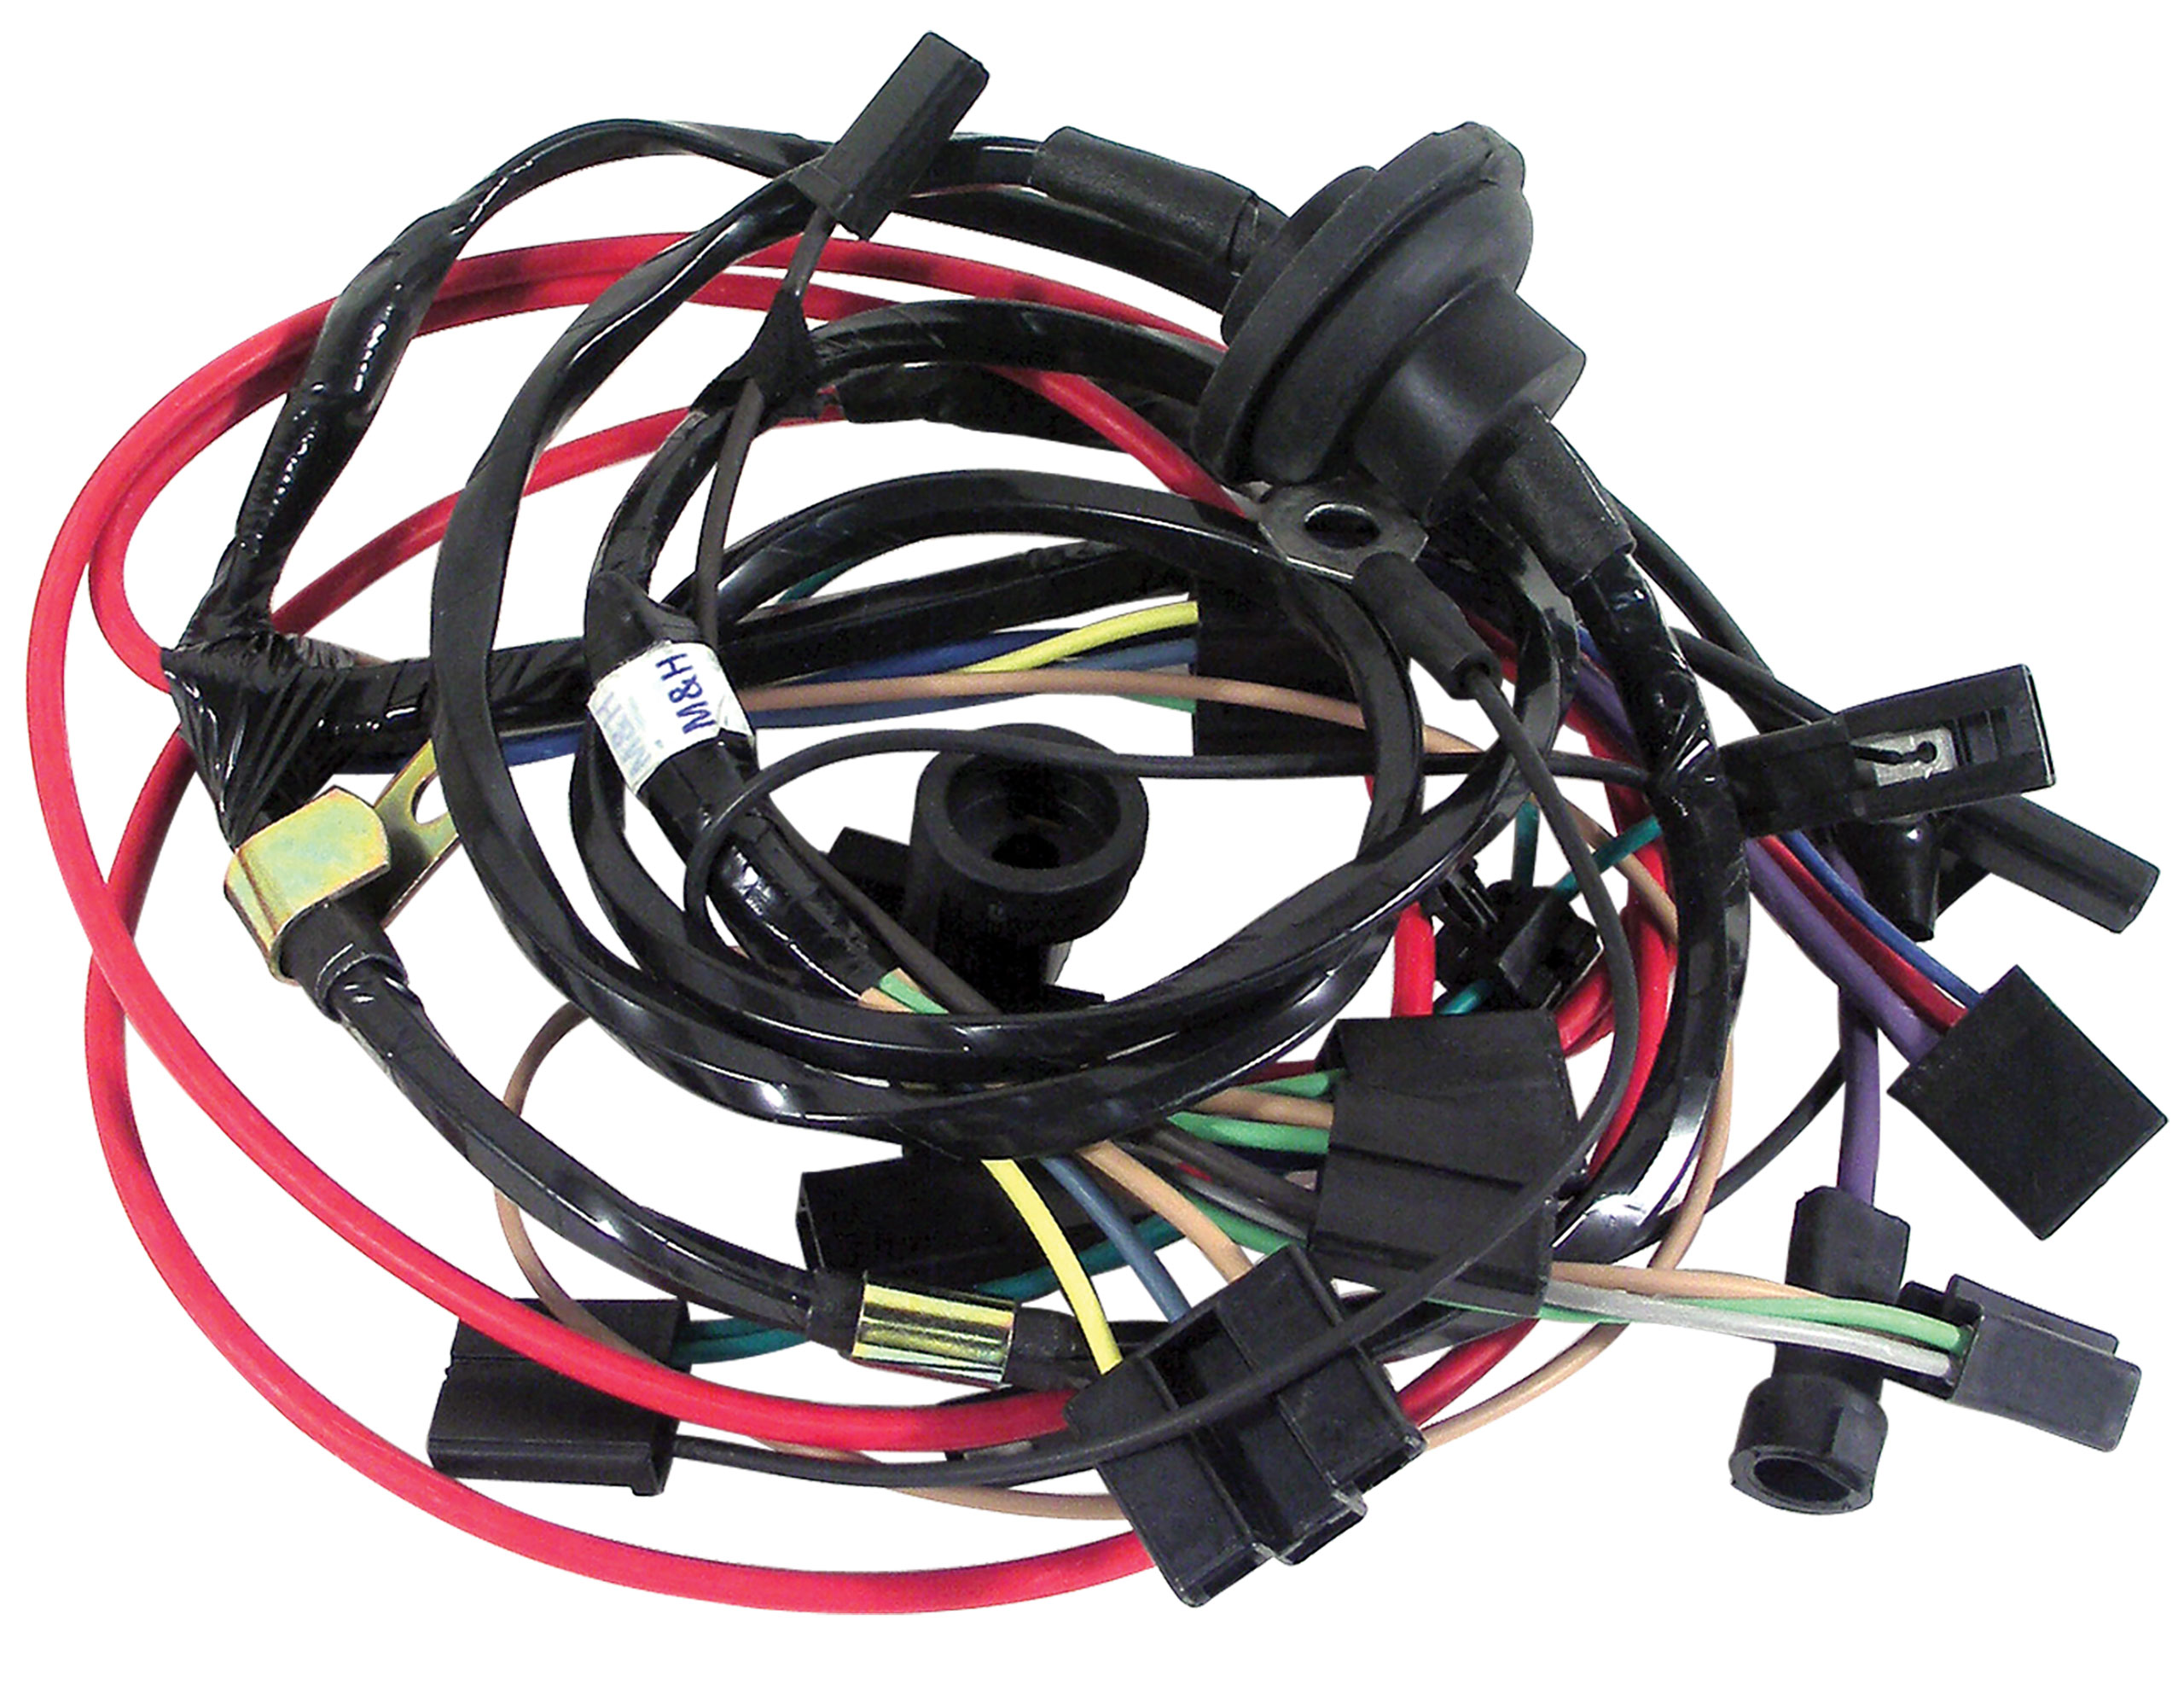 C3 1976 Chevrolet Corvette Harness. Air Conditioning W/Heater Wiring - Lectric Limited, Inc.